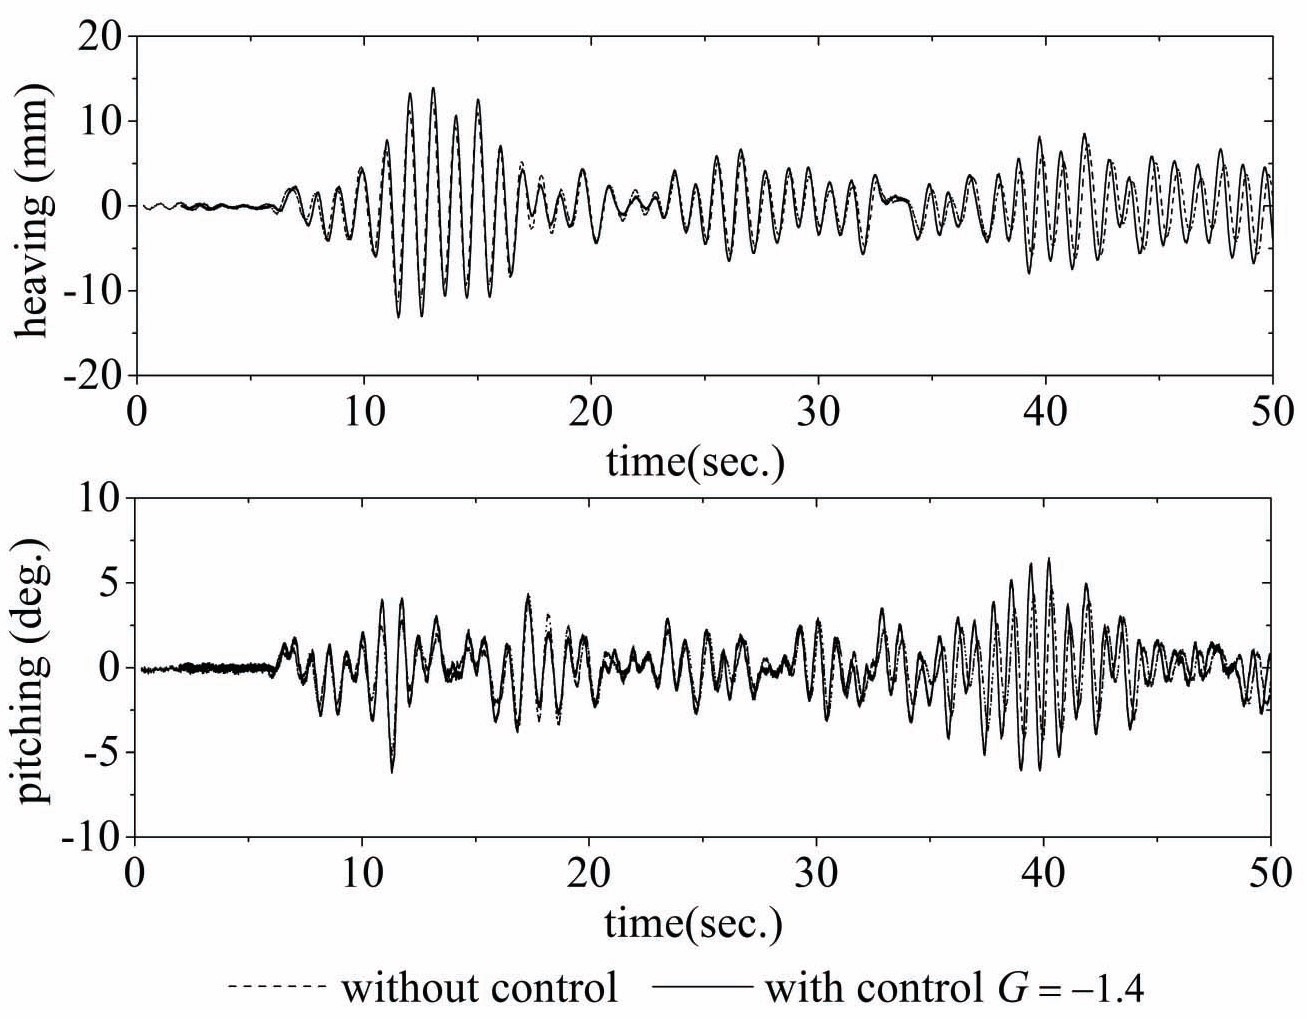 Time trace, without control G = 0 and with control G = -1.4 at U/(ωαb)=2.77